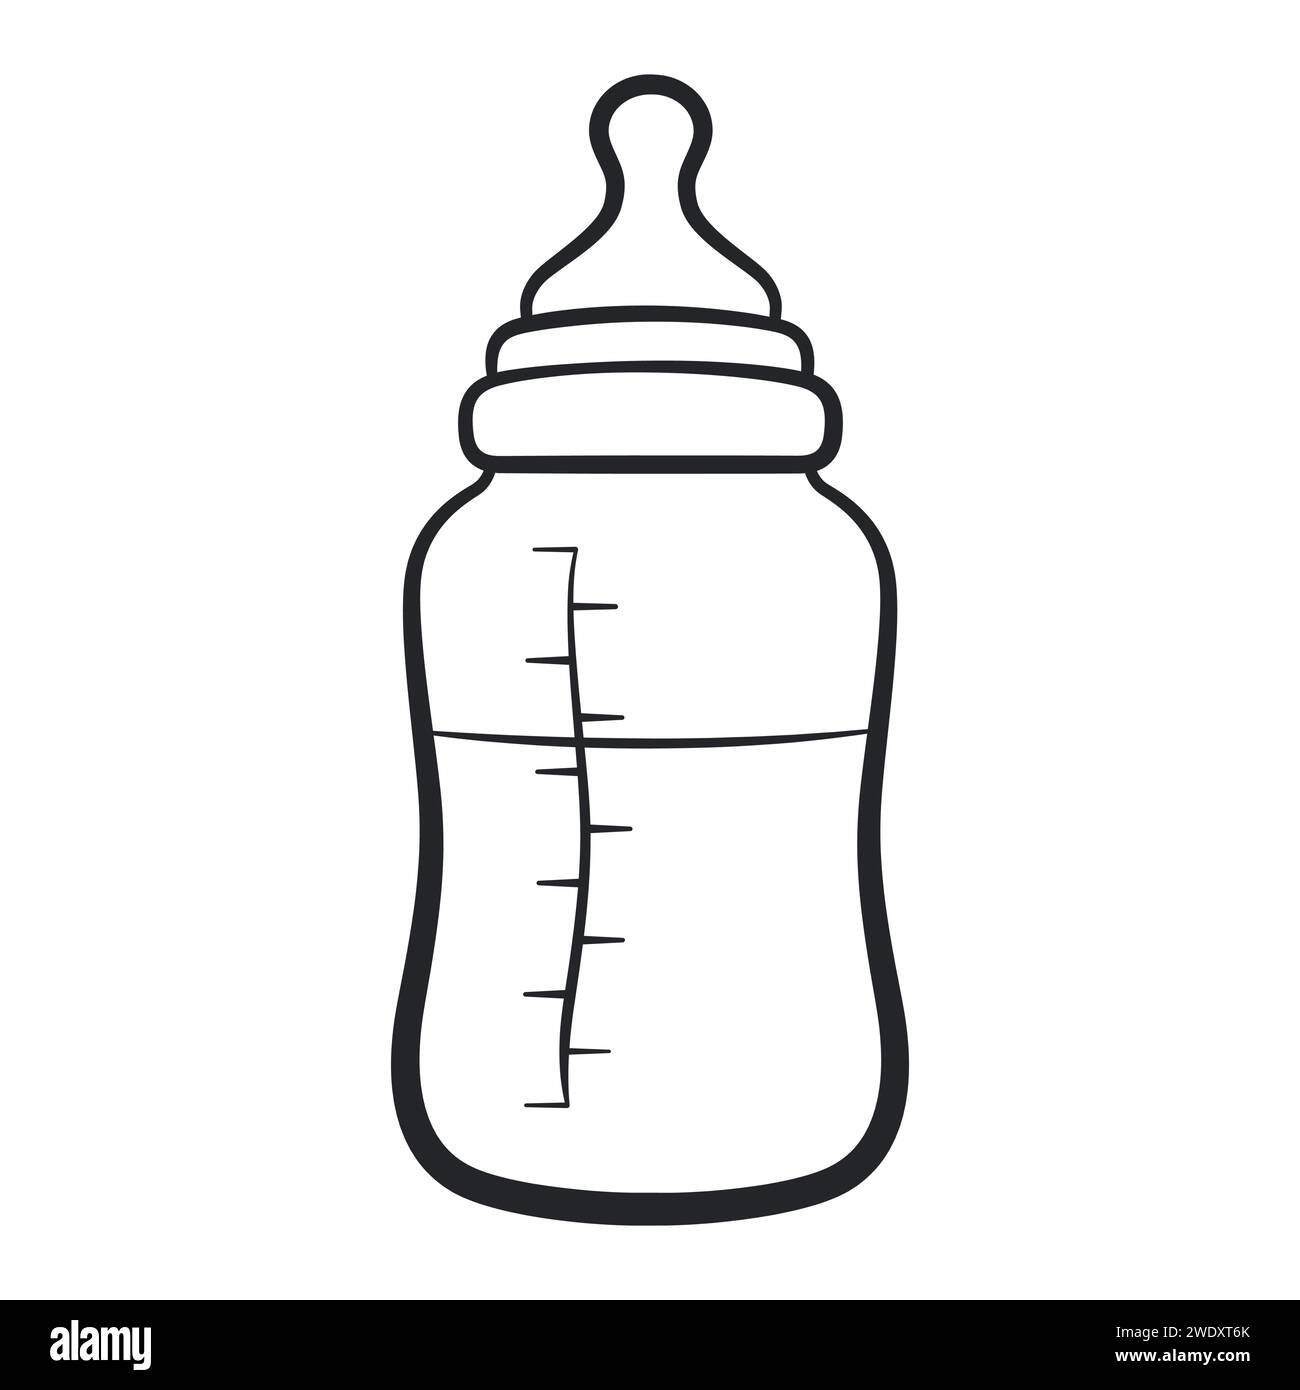 Illustration of baby bottle black contour isolated Stock Vector